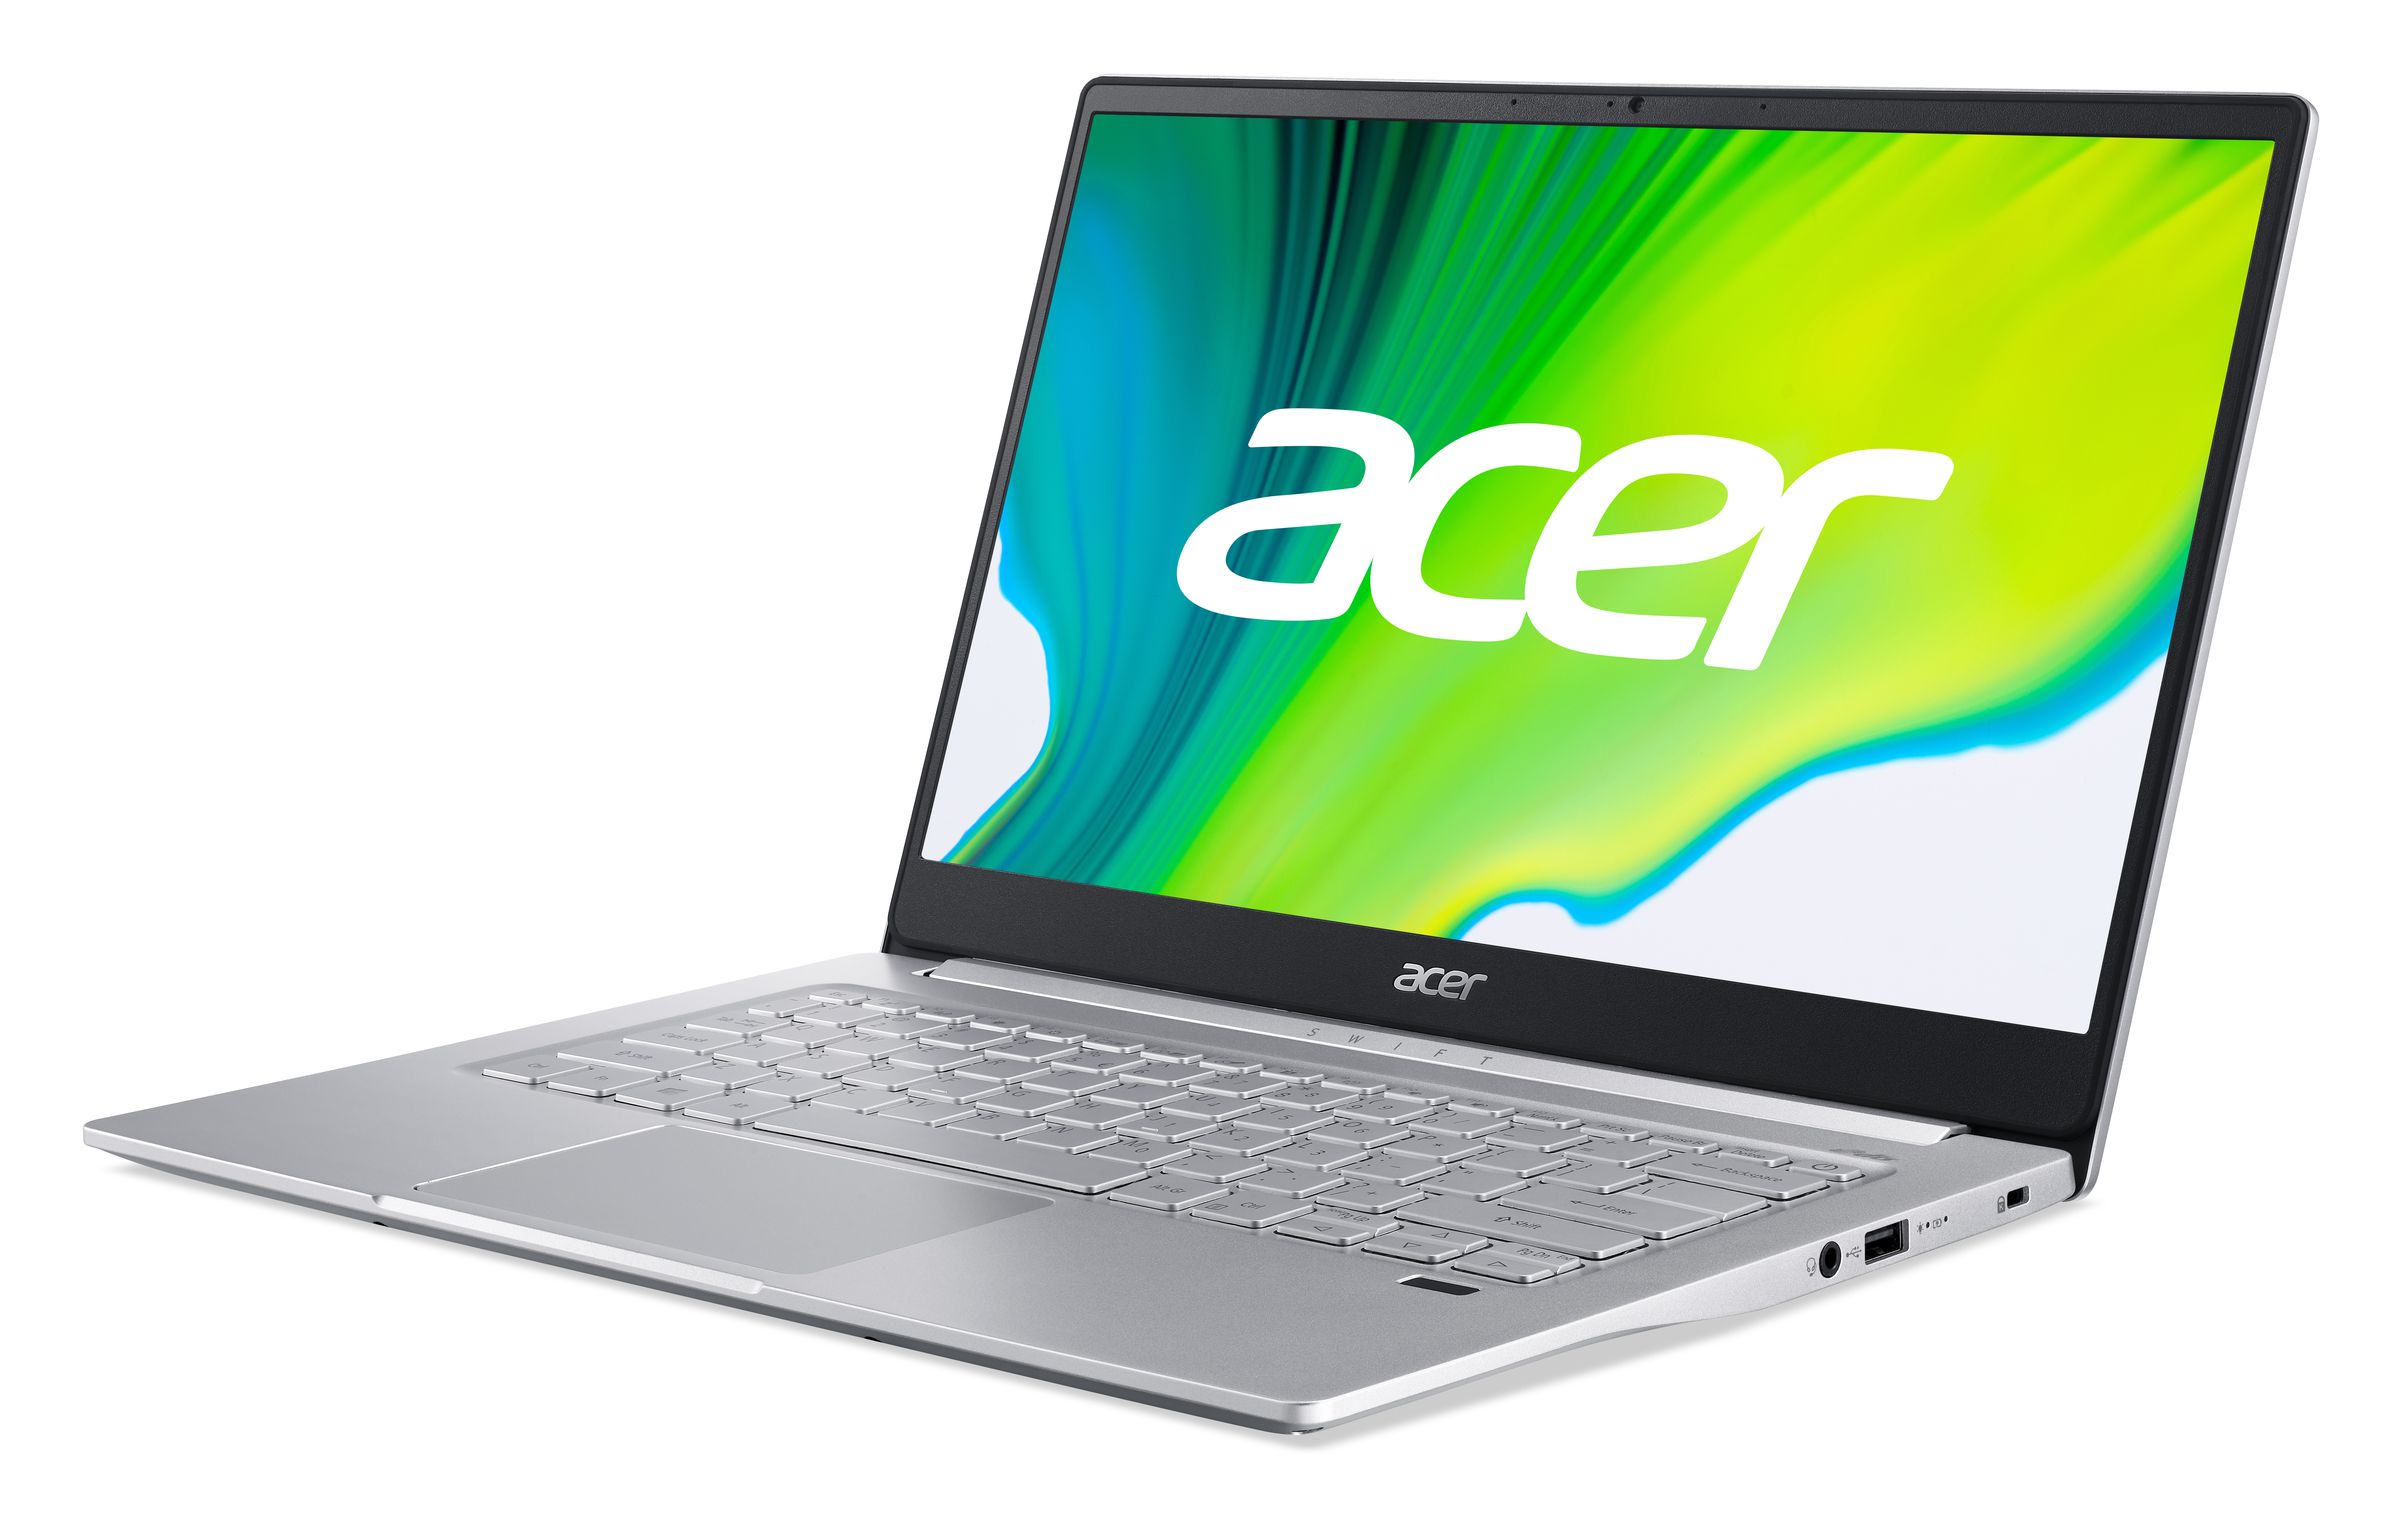 The Acer Swift 3 SF314-59 from the left side.